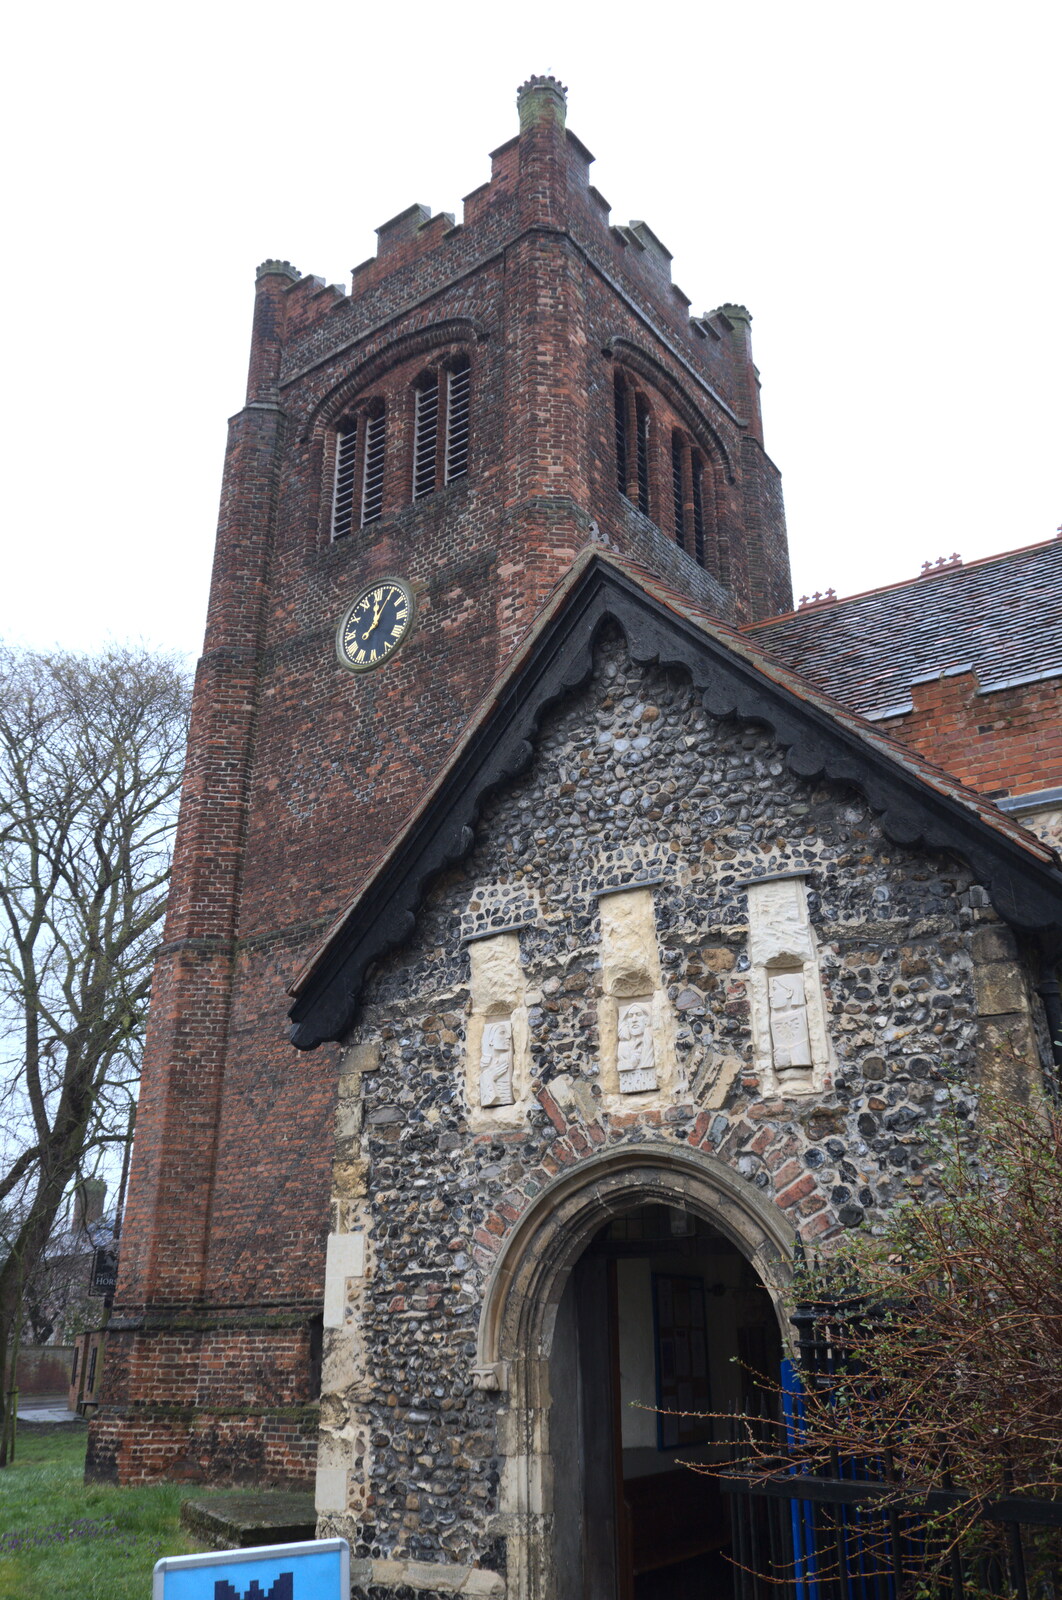 St. Mary at Elms Church from Fred's Flute Exam, Ipswich, Suffolk - 5th March 2020